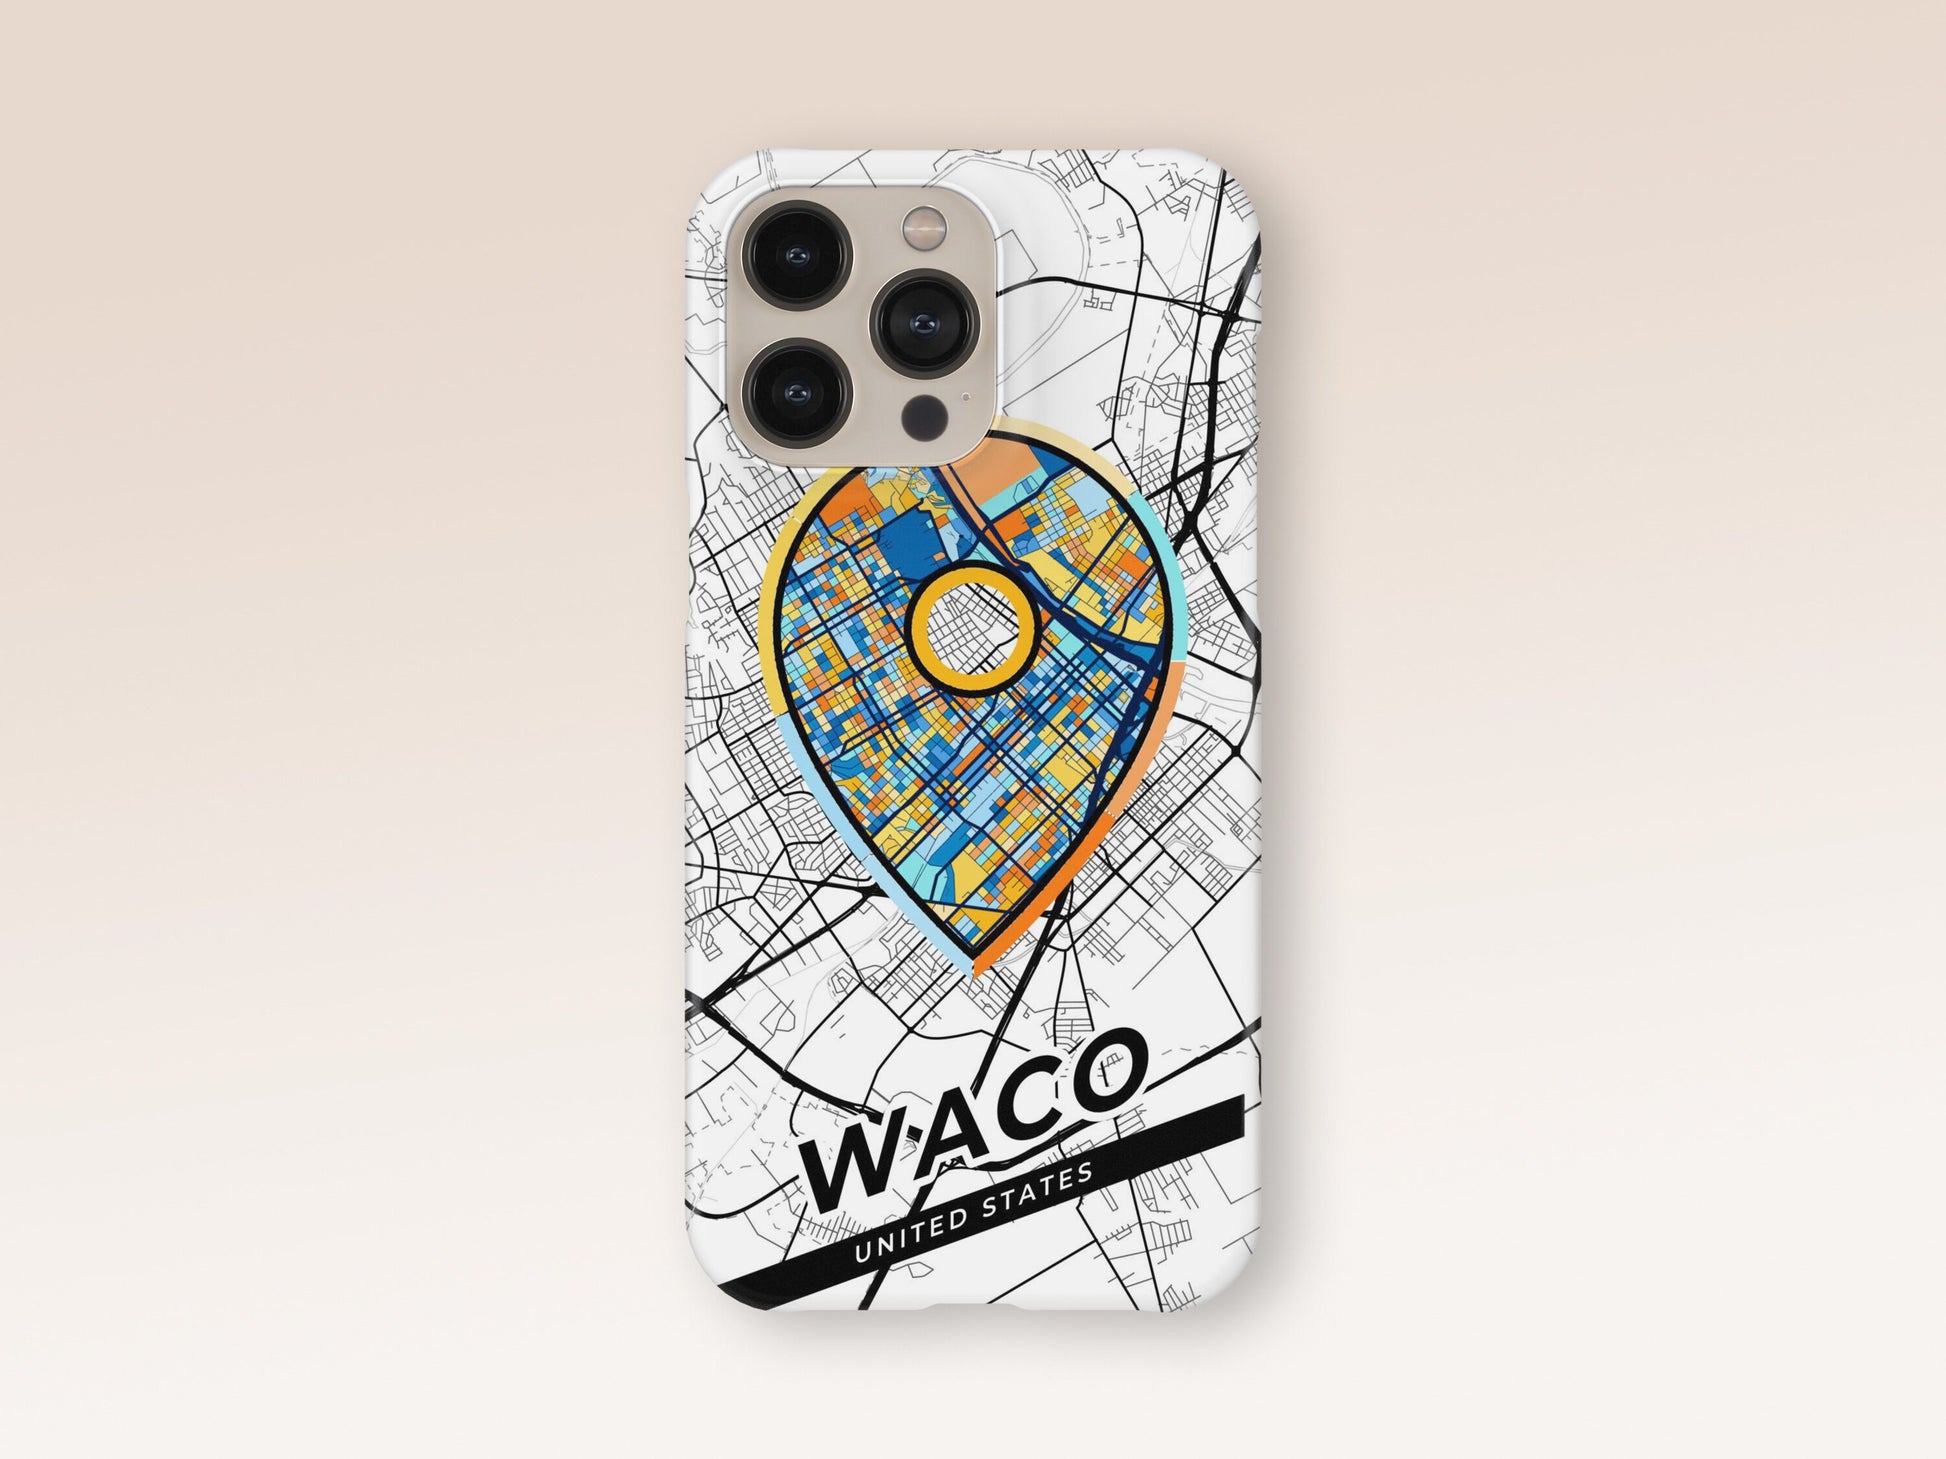 Waco Texas slim phone case with colorful icon 1